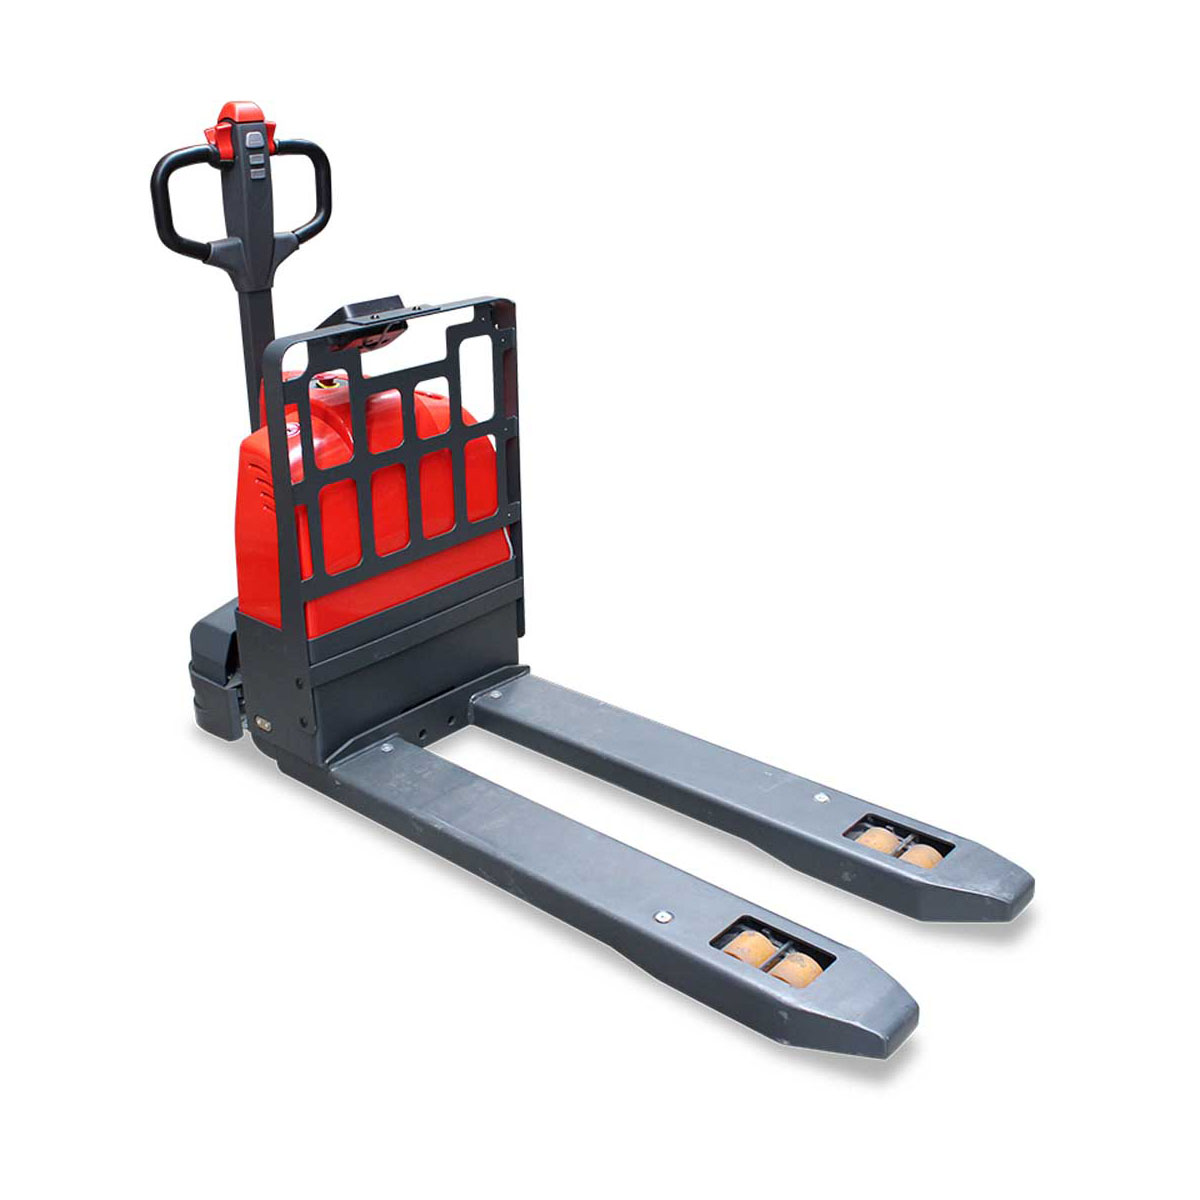 Buy Electric Pallet Truck with Scales in 2-Way Pallet Trucks from Astrolift NZ